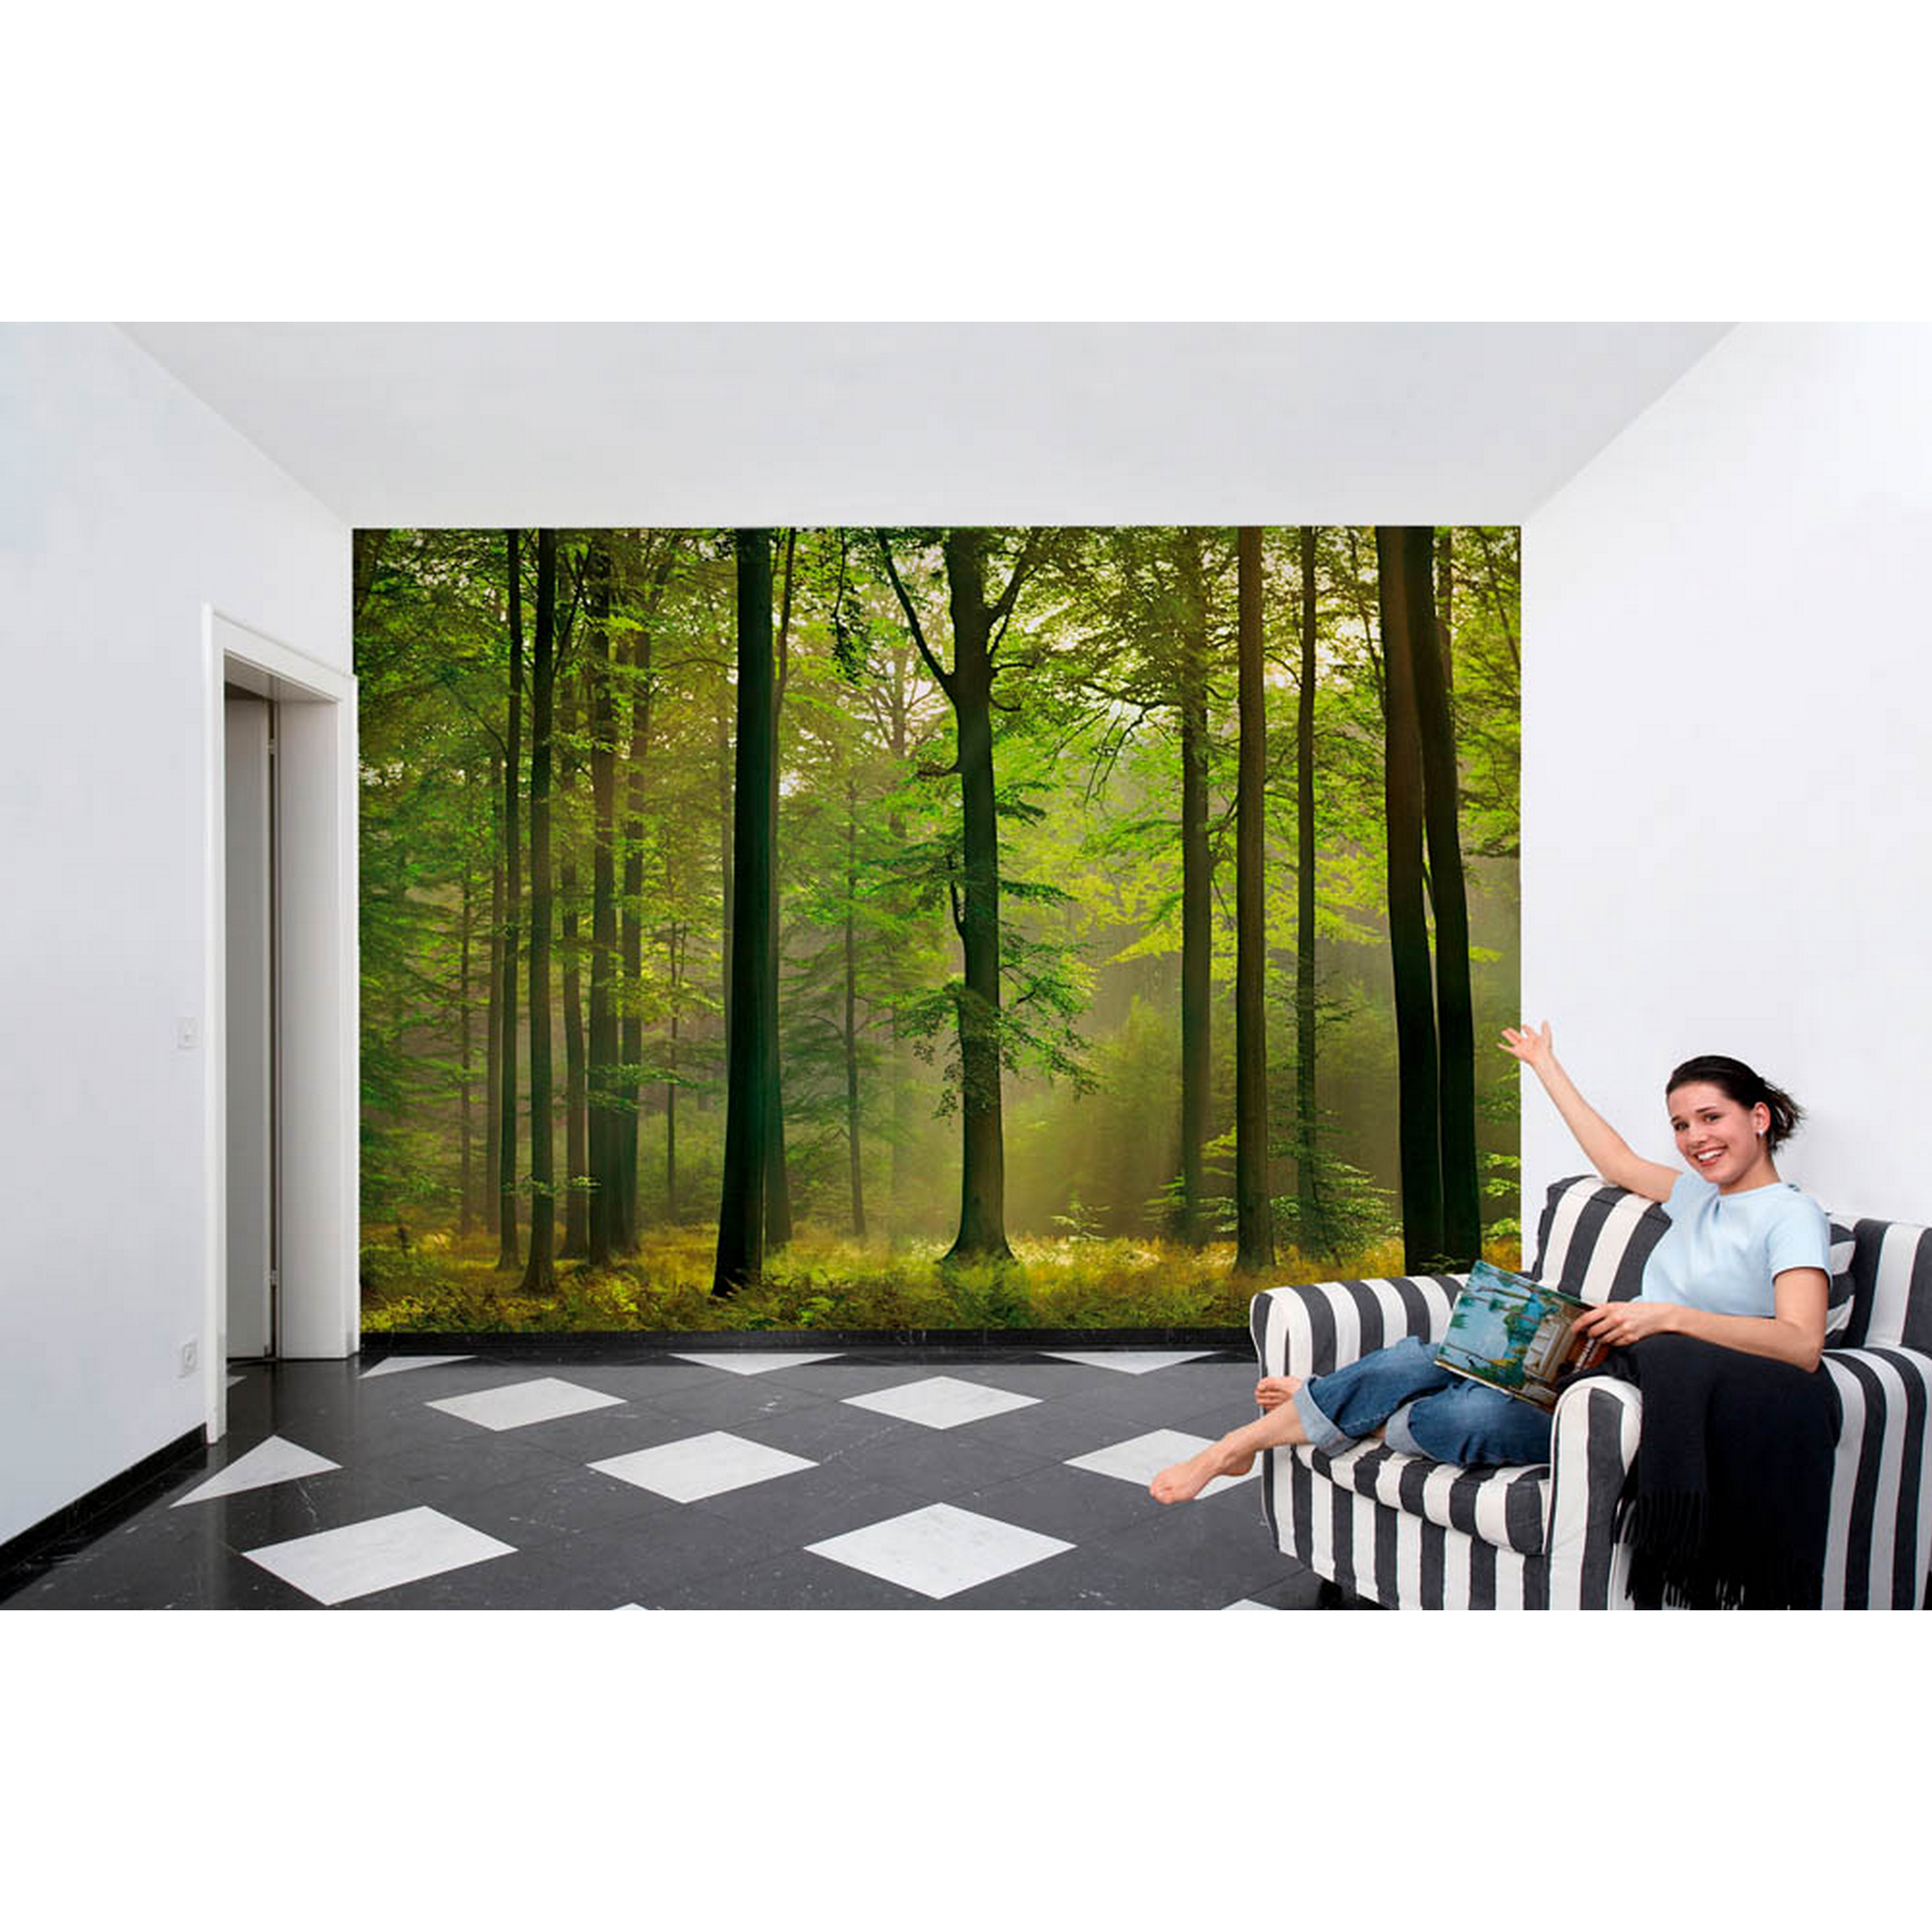 Reinders Fototapete 'Herbst im Wald' 366 x 254 cm + product picture